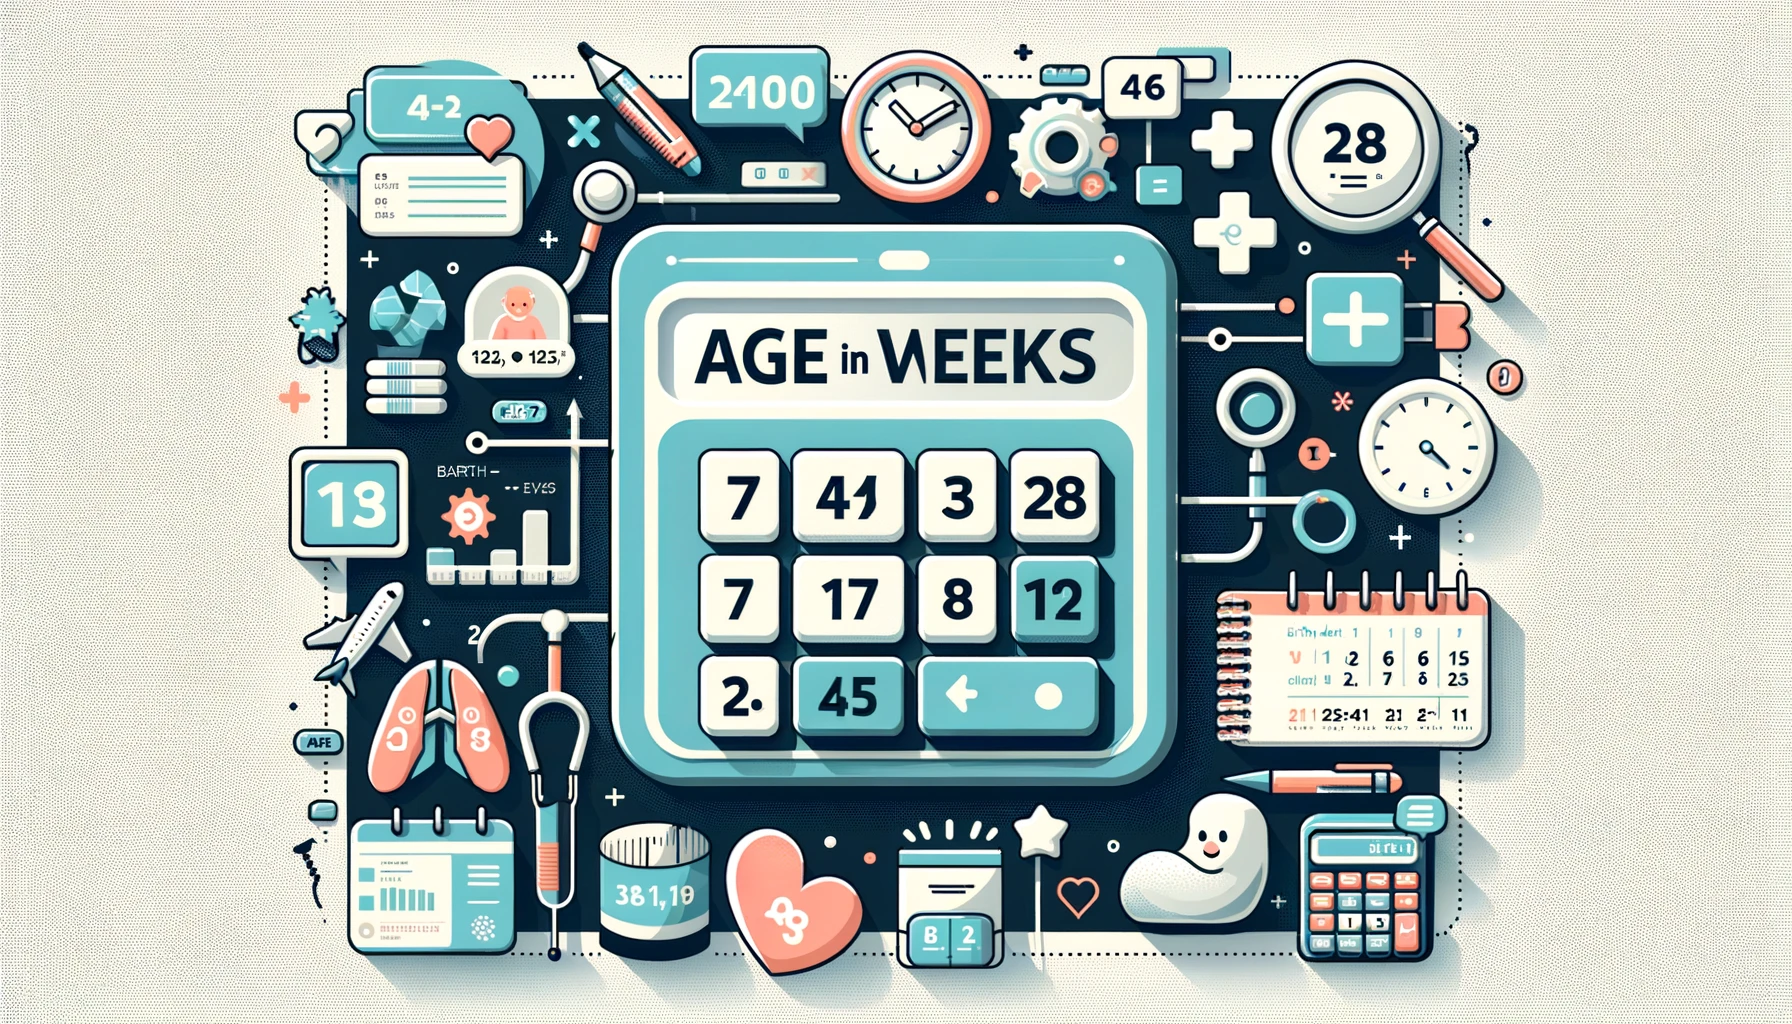 Calculate age in weeks